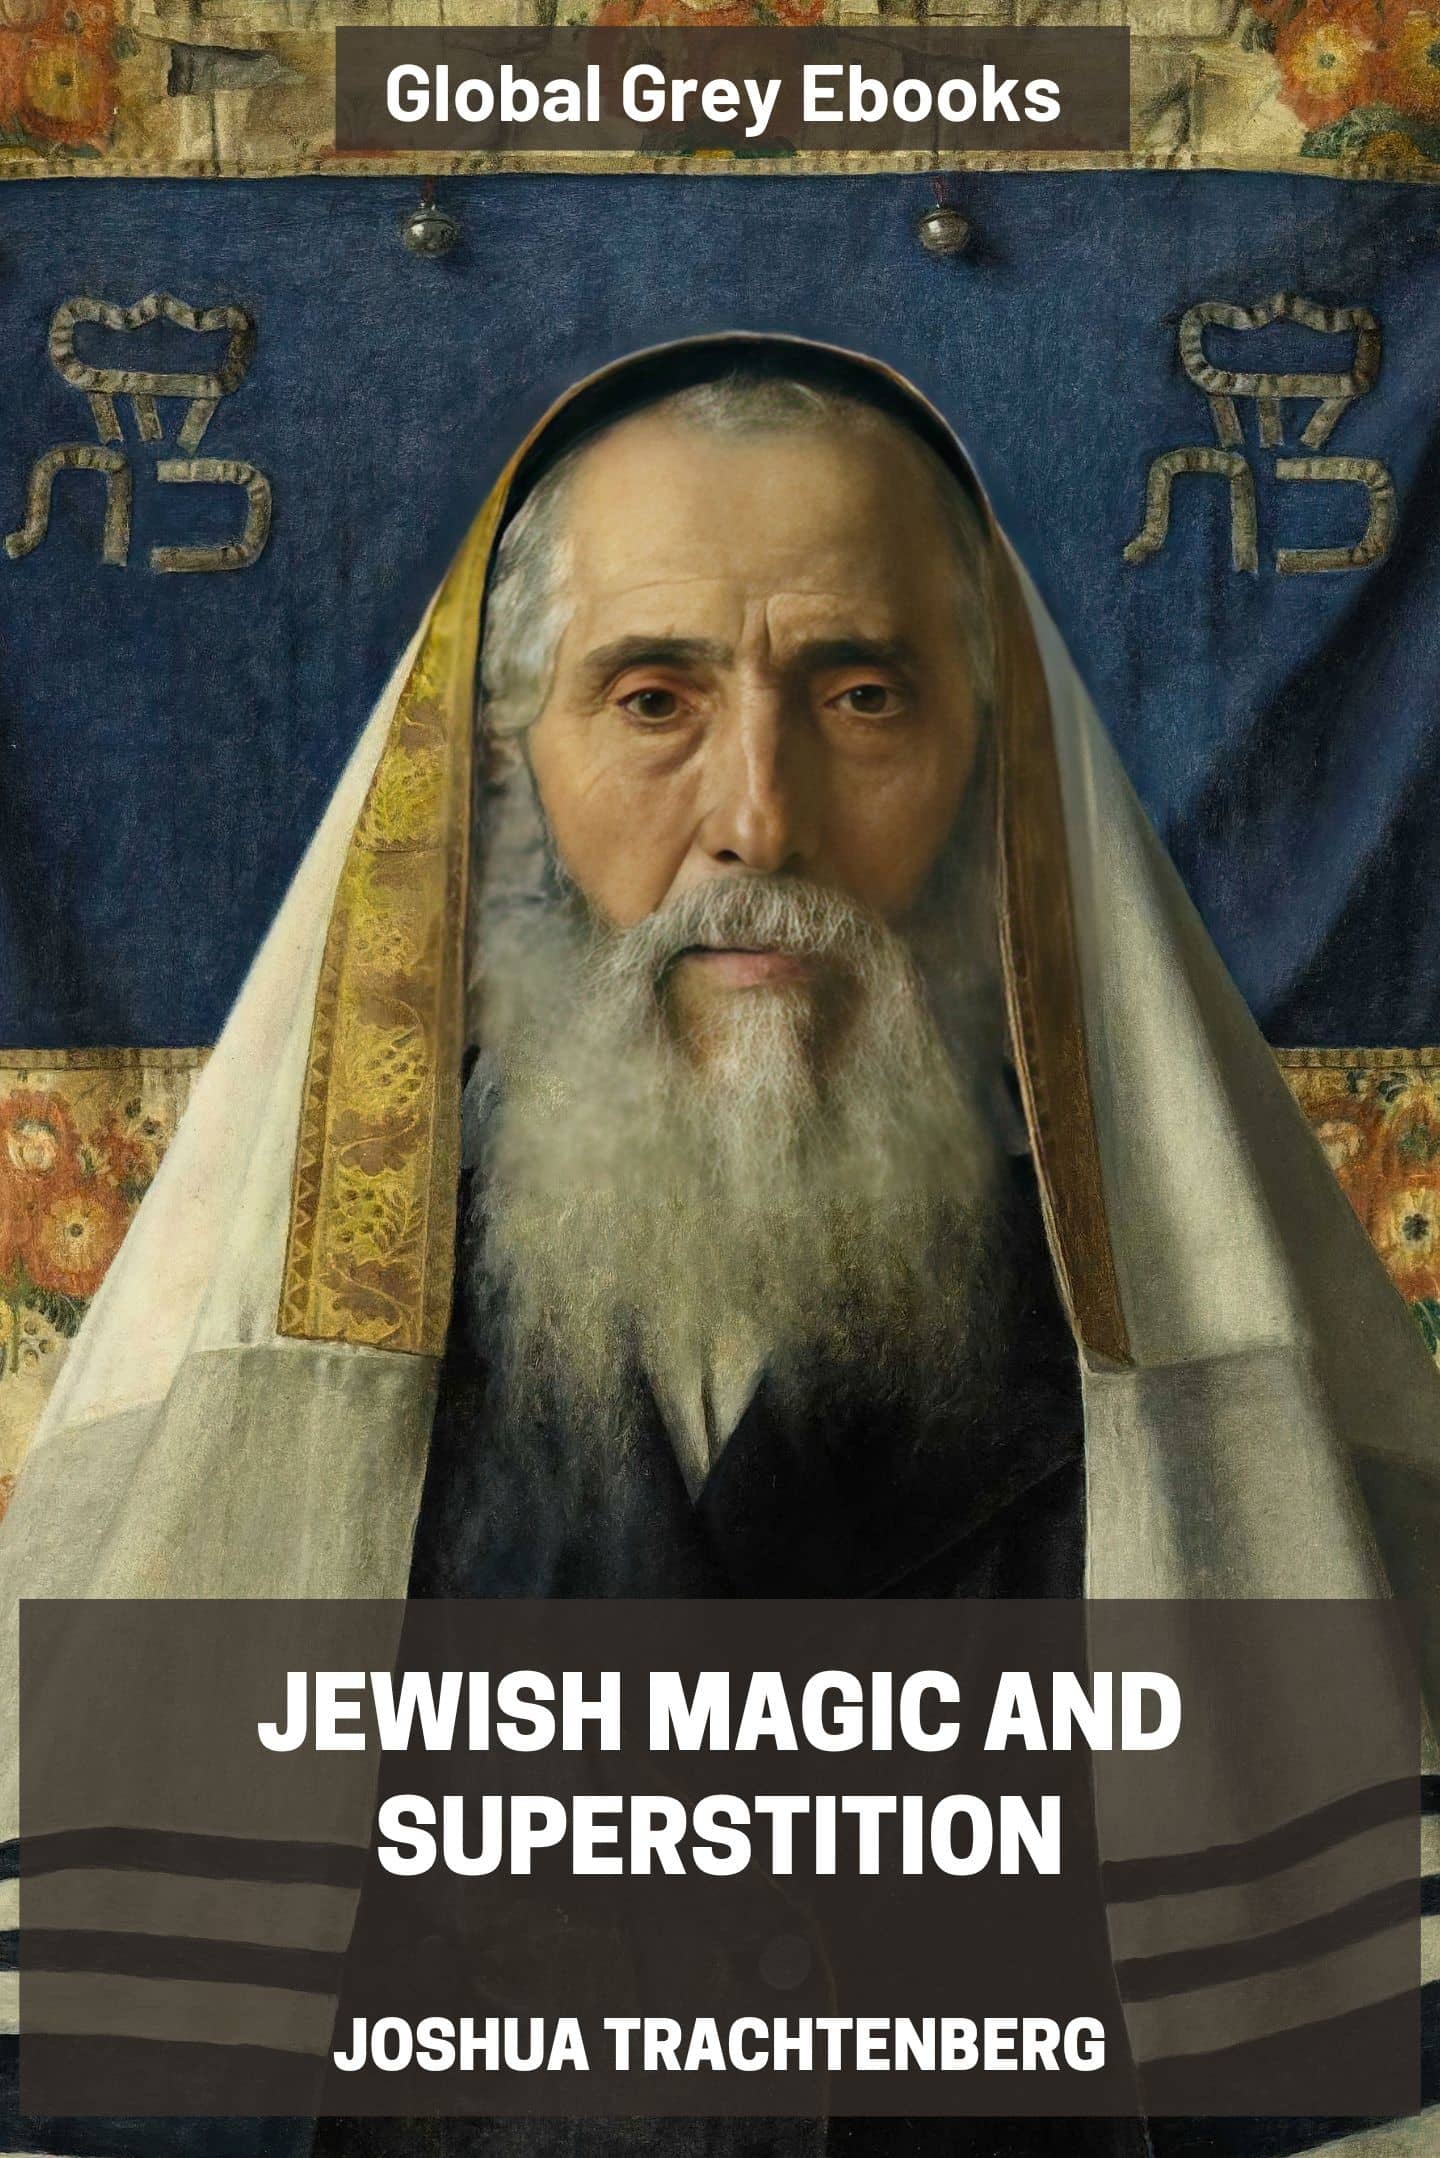 https://www.globalgreyebooks.com/content/book-covers/joshua-trachtenberg_jewish-magic-and-superstition-large.jpg